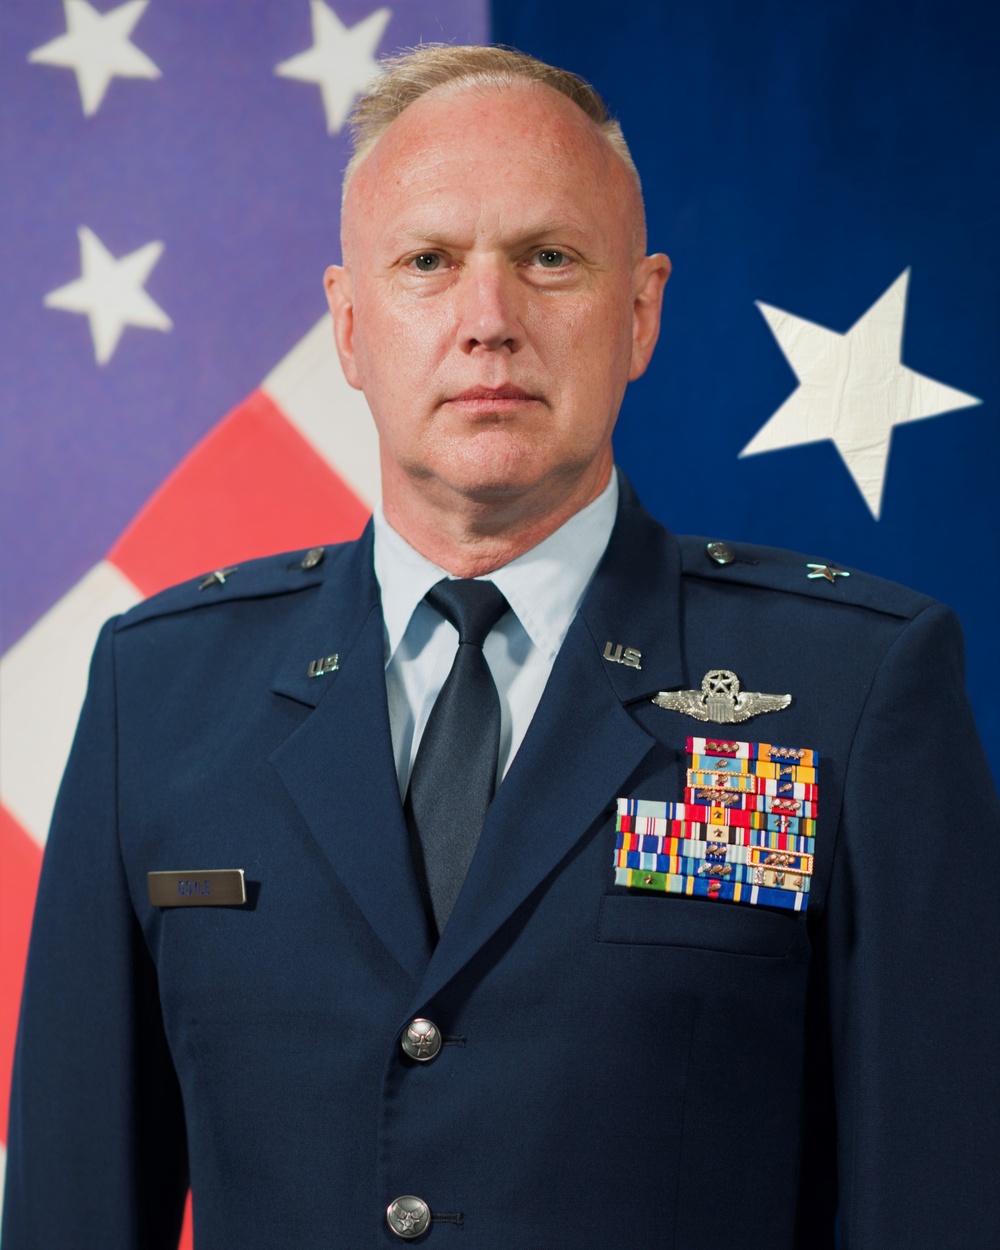 Oldenburg native, Fort Wayne resident promoted to brigadier general in Indiana National Guard